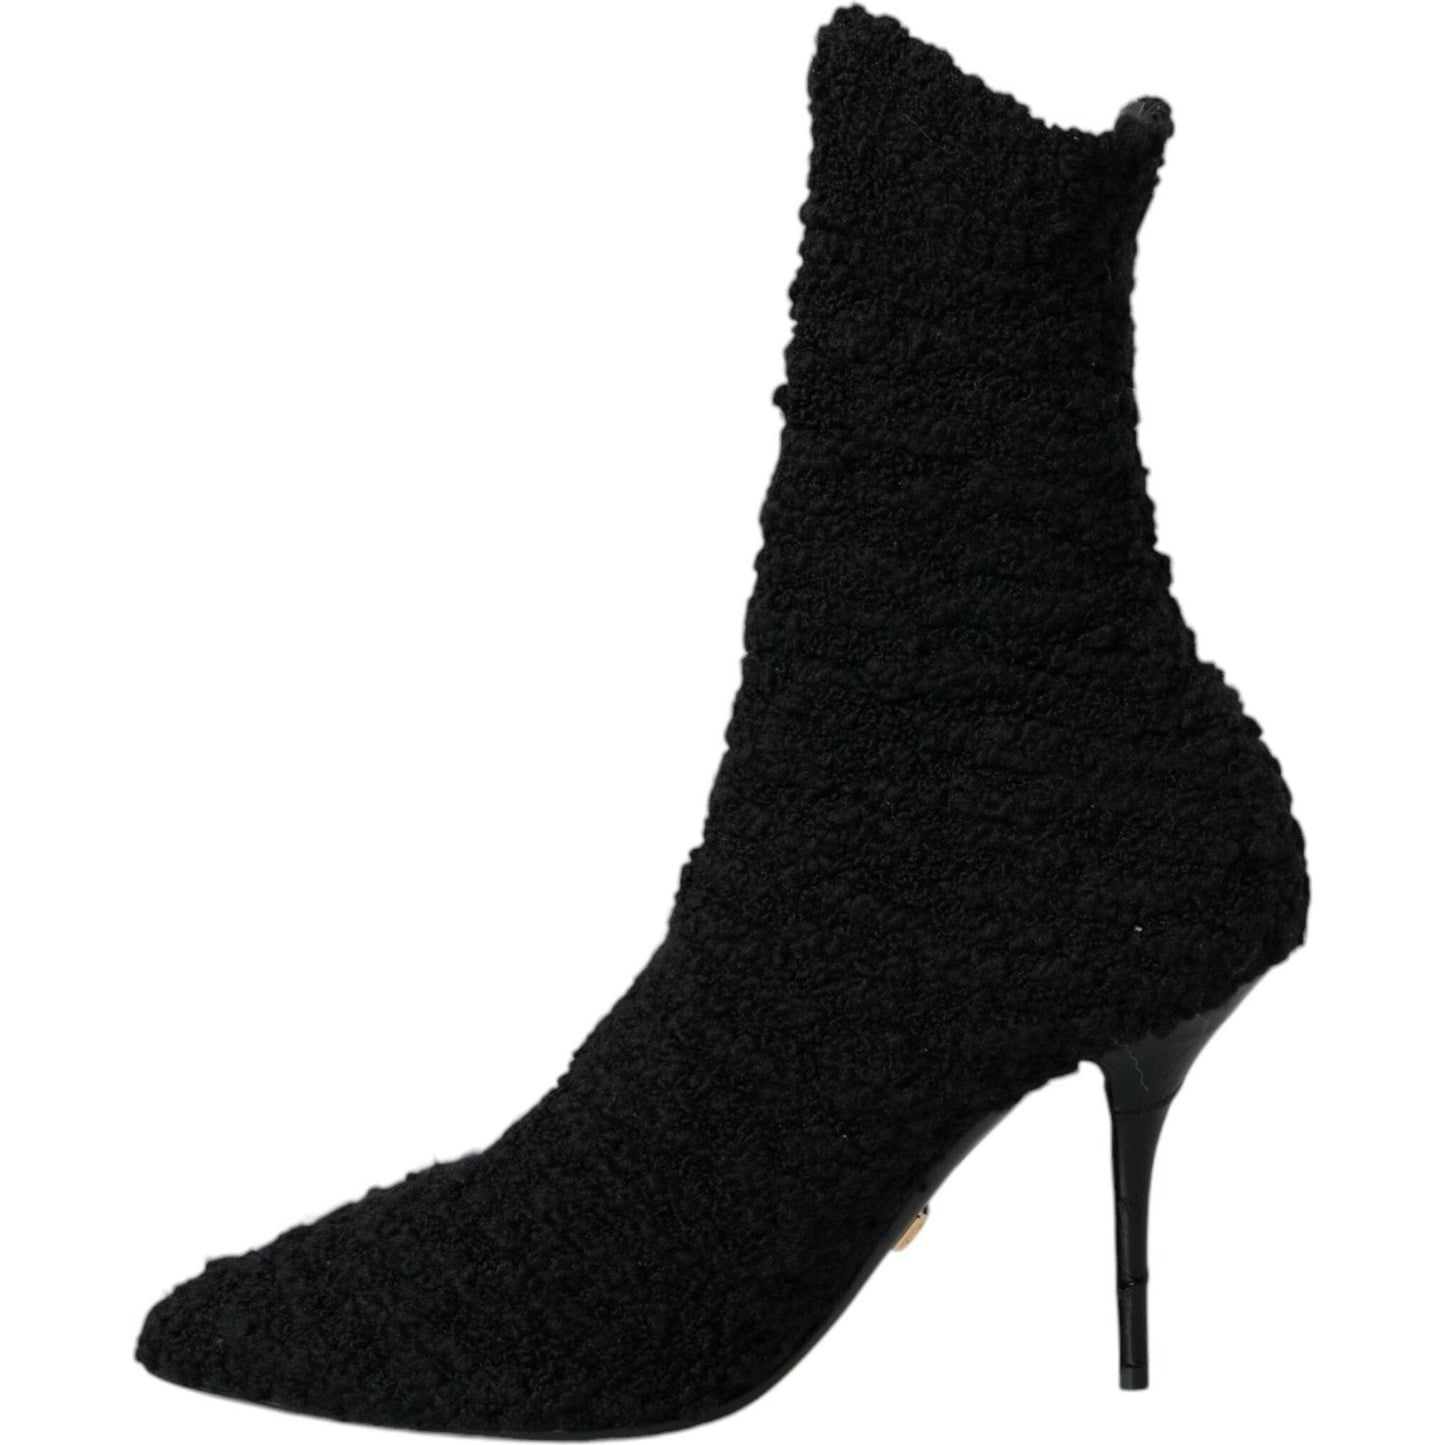 Dolce & Gabbana Black Suede Leather Ankle Heels Boots Shoes black-suede-leather-ankle-heels-boots-shoes-1